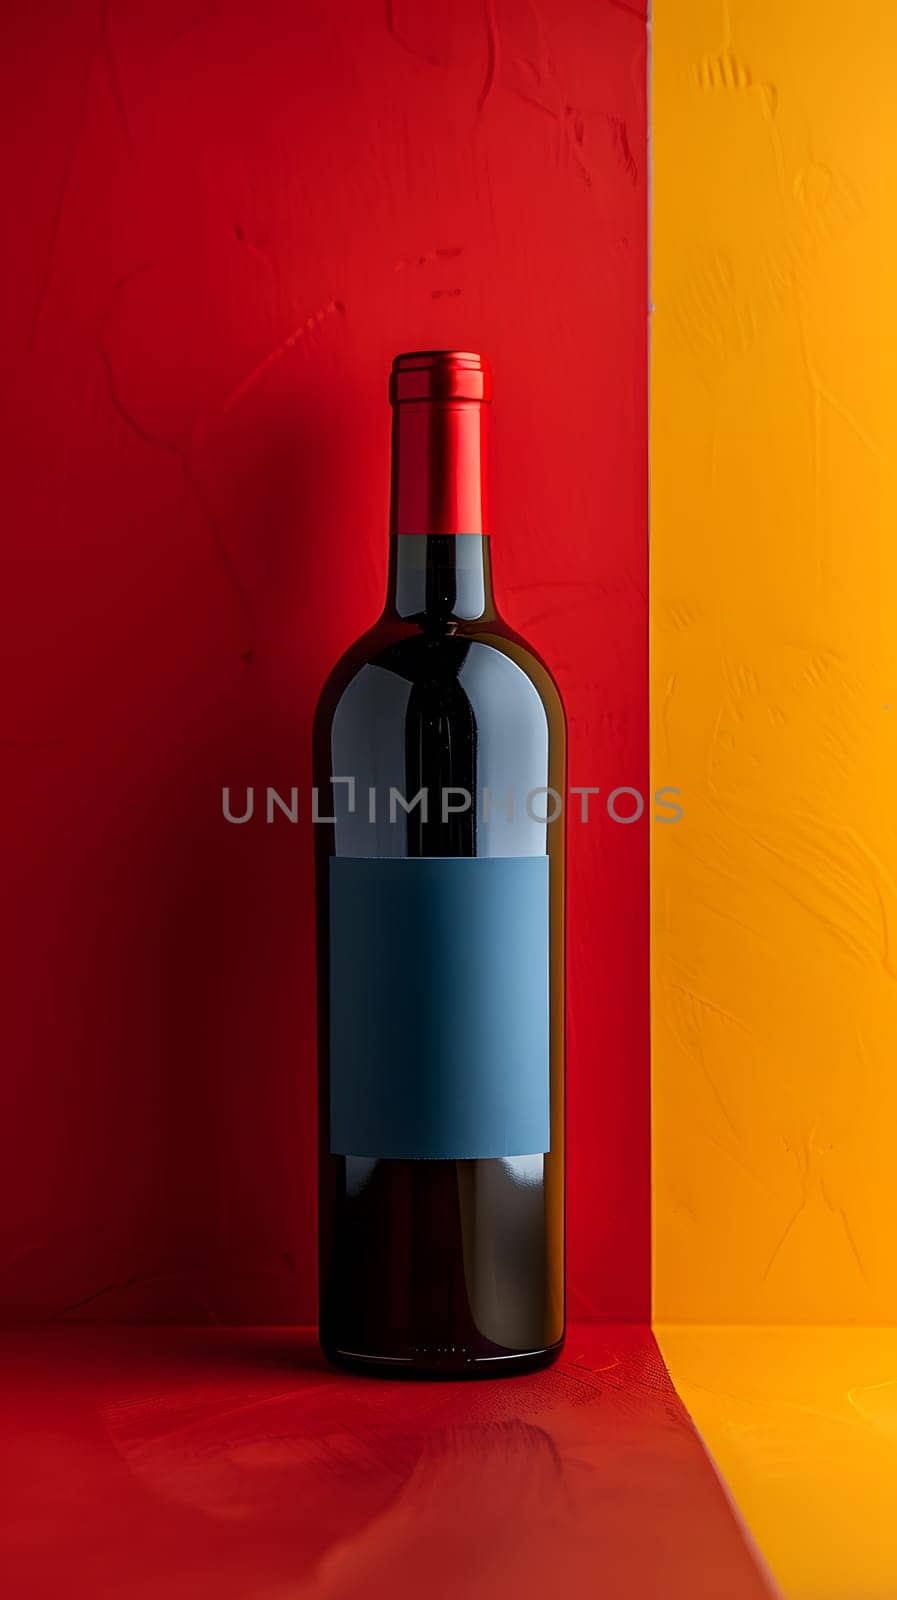 Red wine bottle with blue label on red and yellow background by Nadtochiy